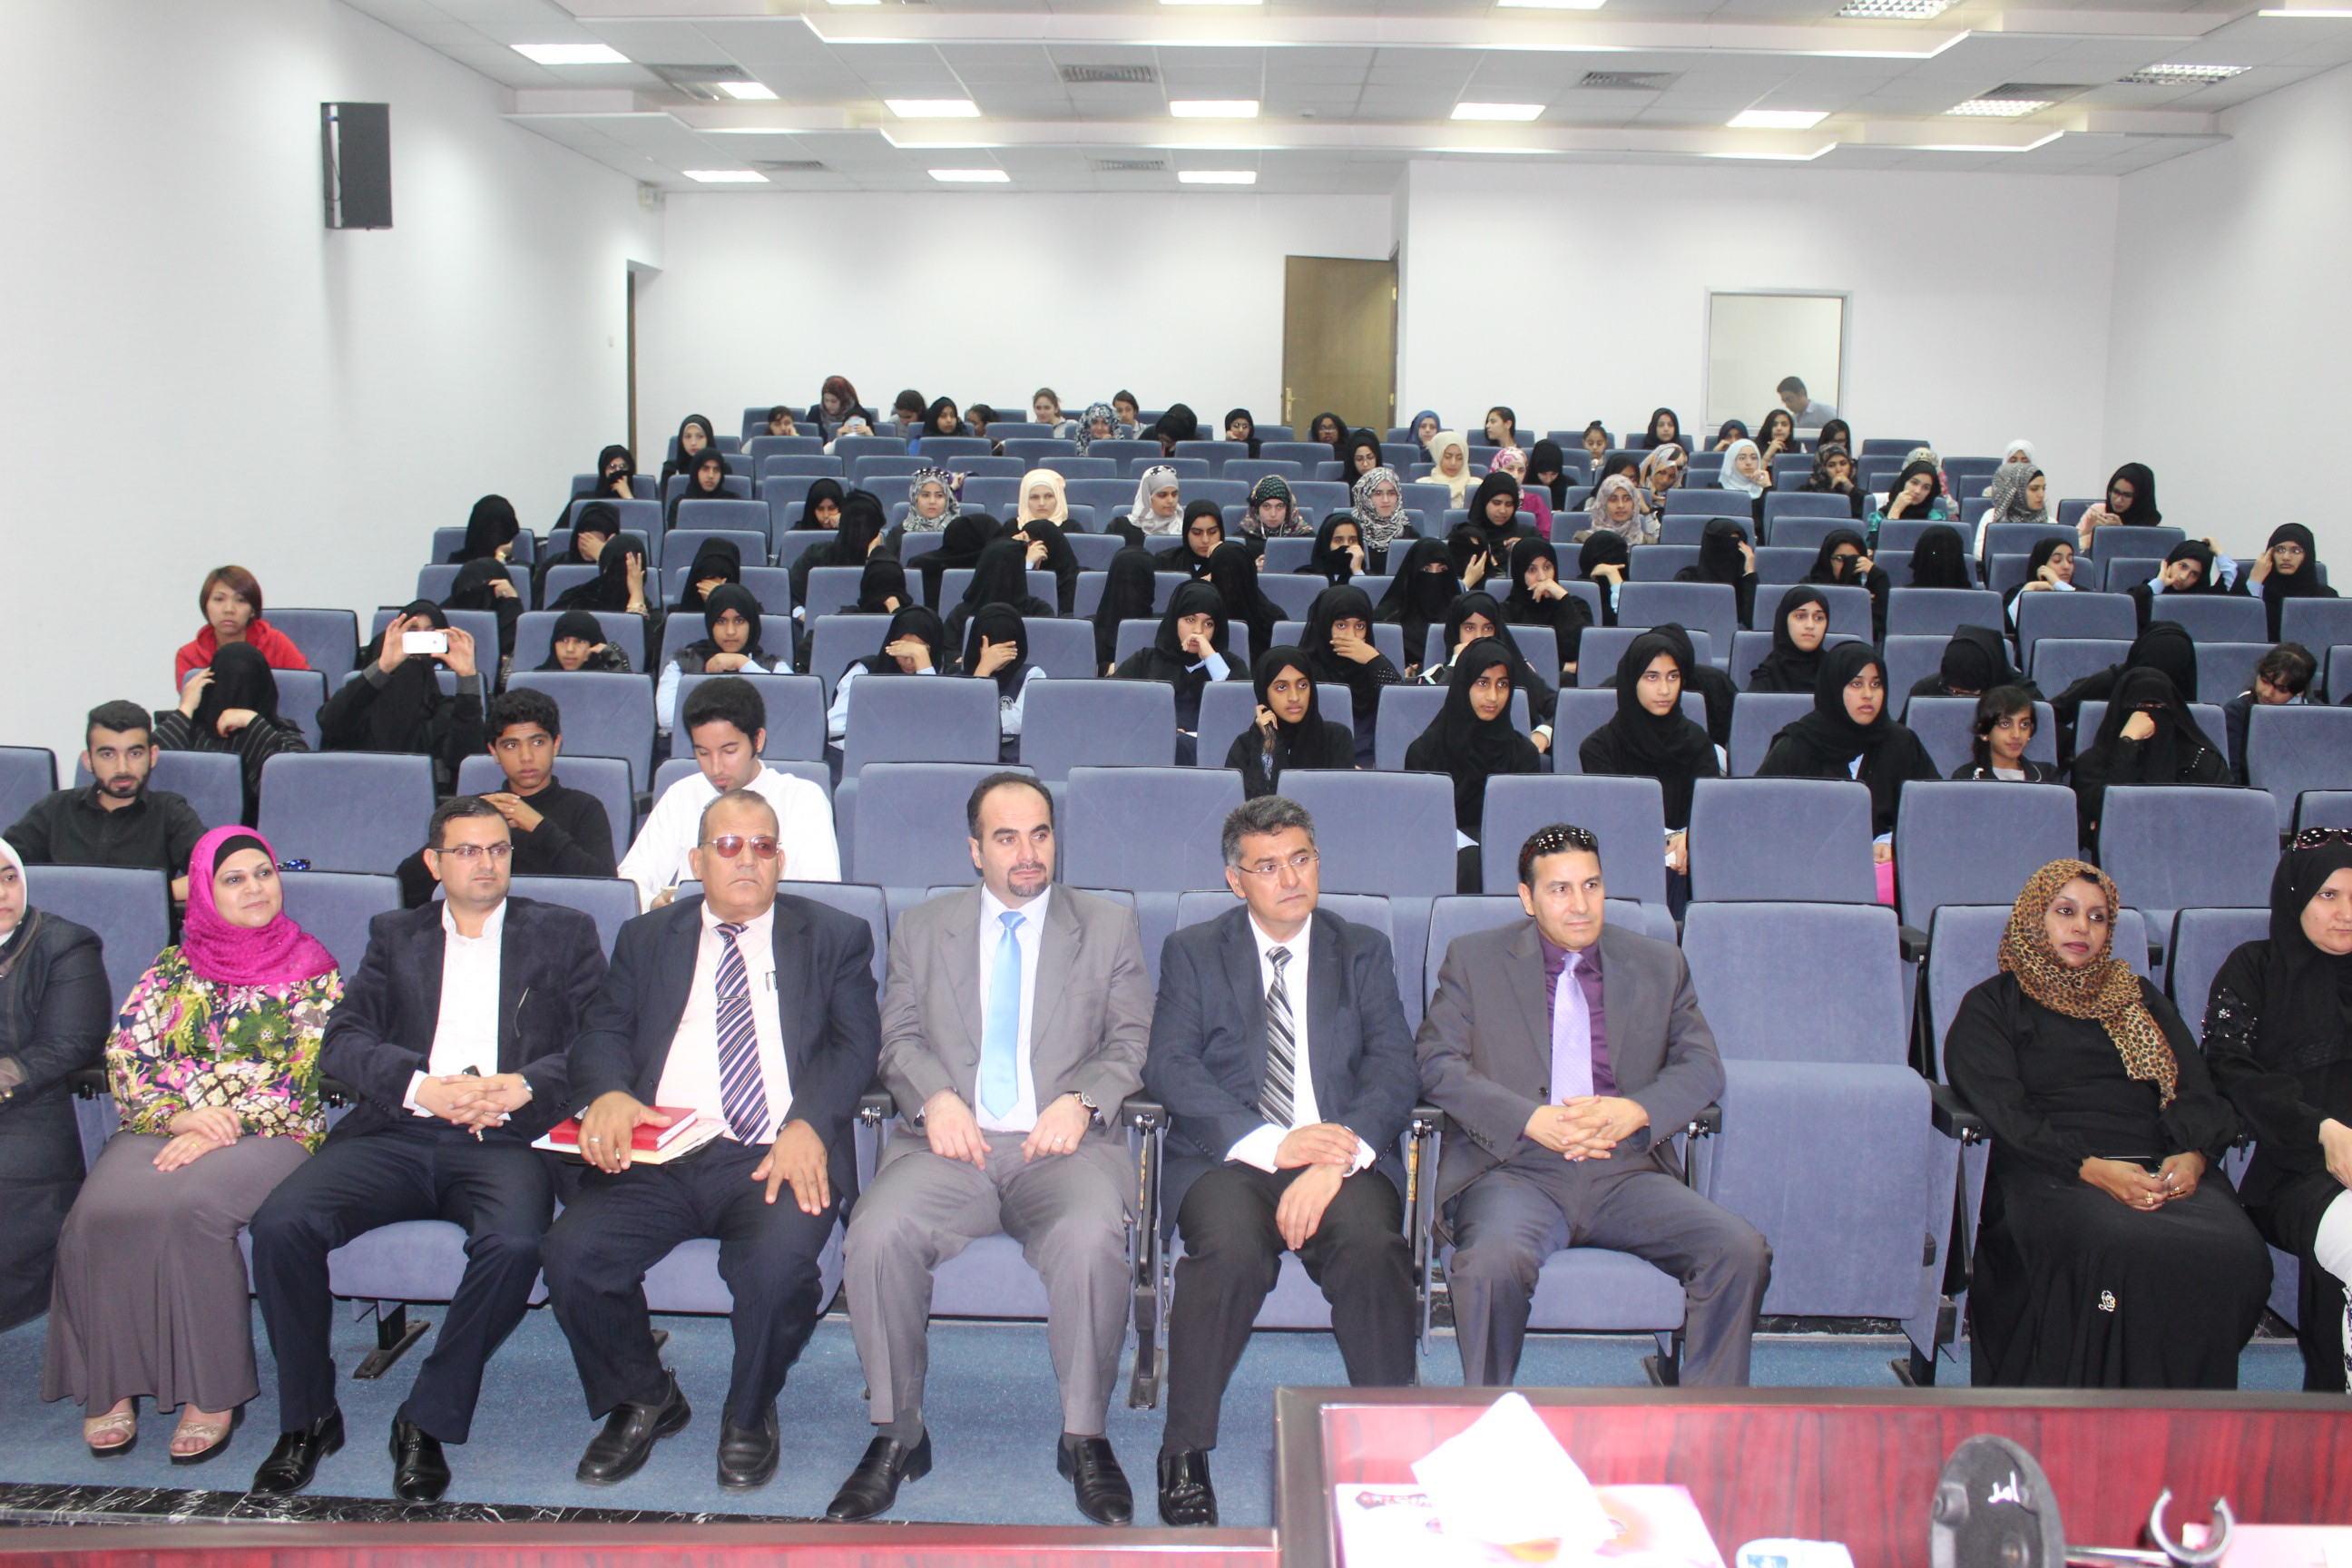 “A Literate Generation; a generation capable of the reading challenges" in Al Ain University